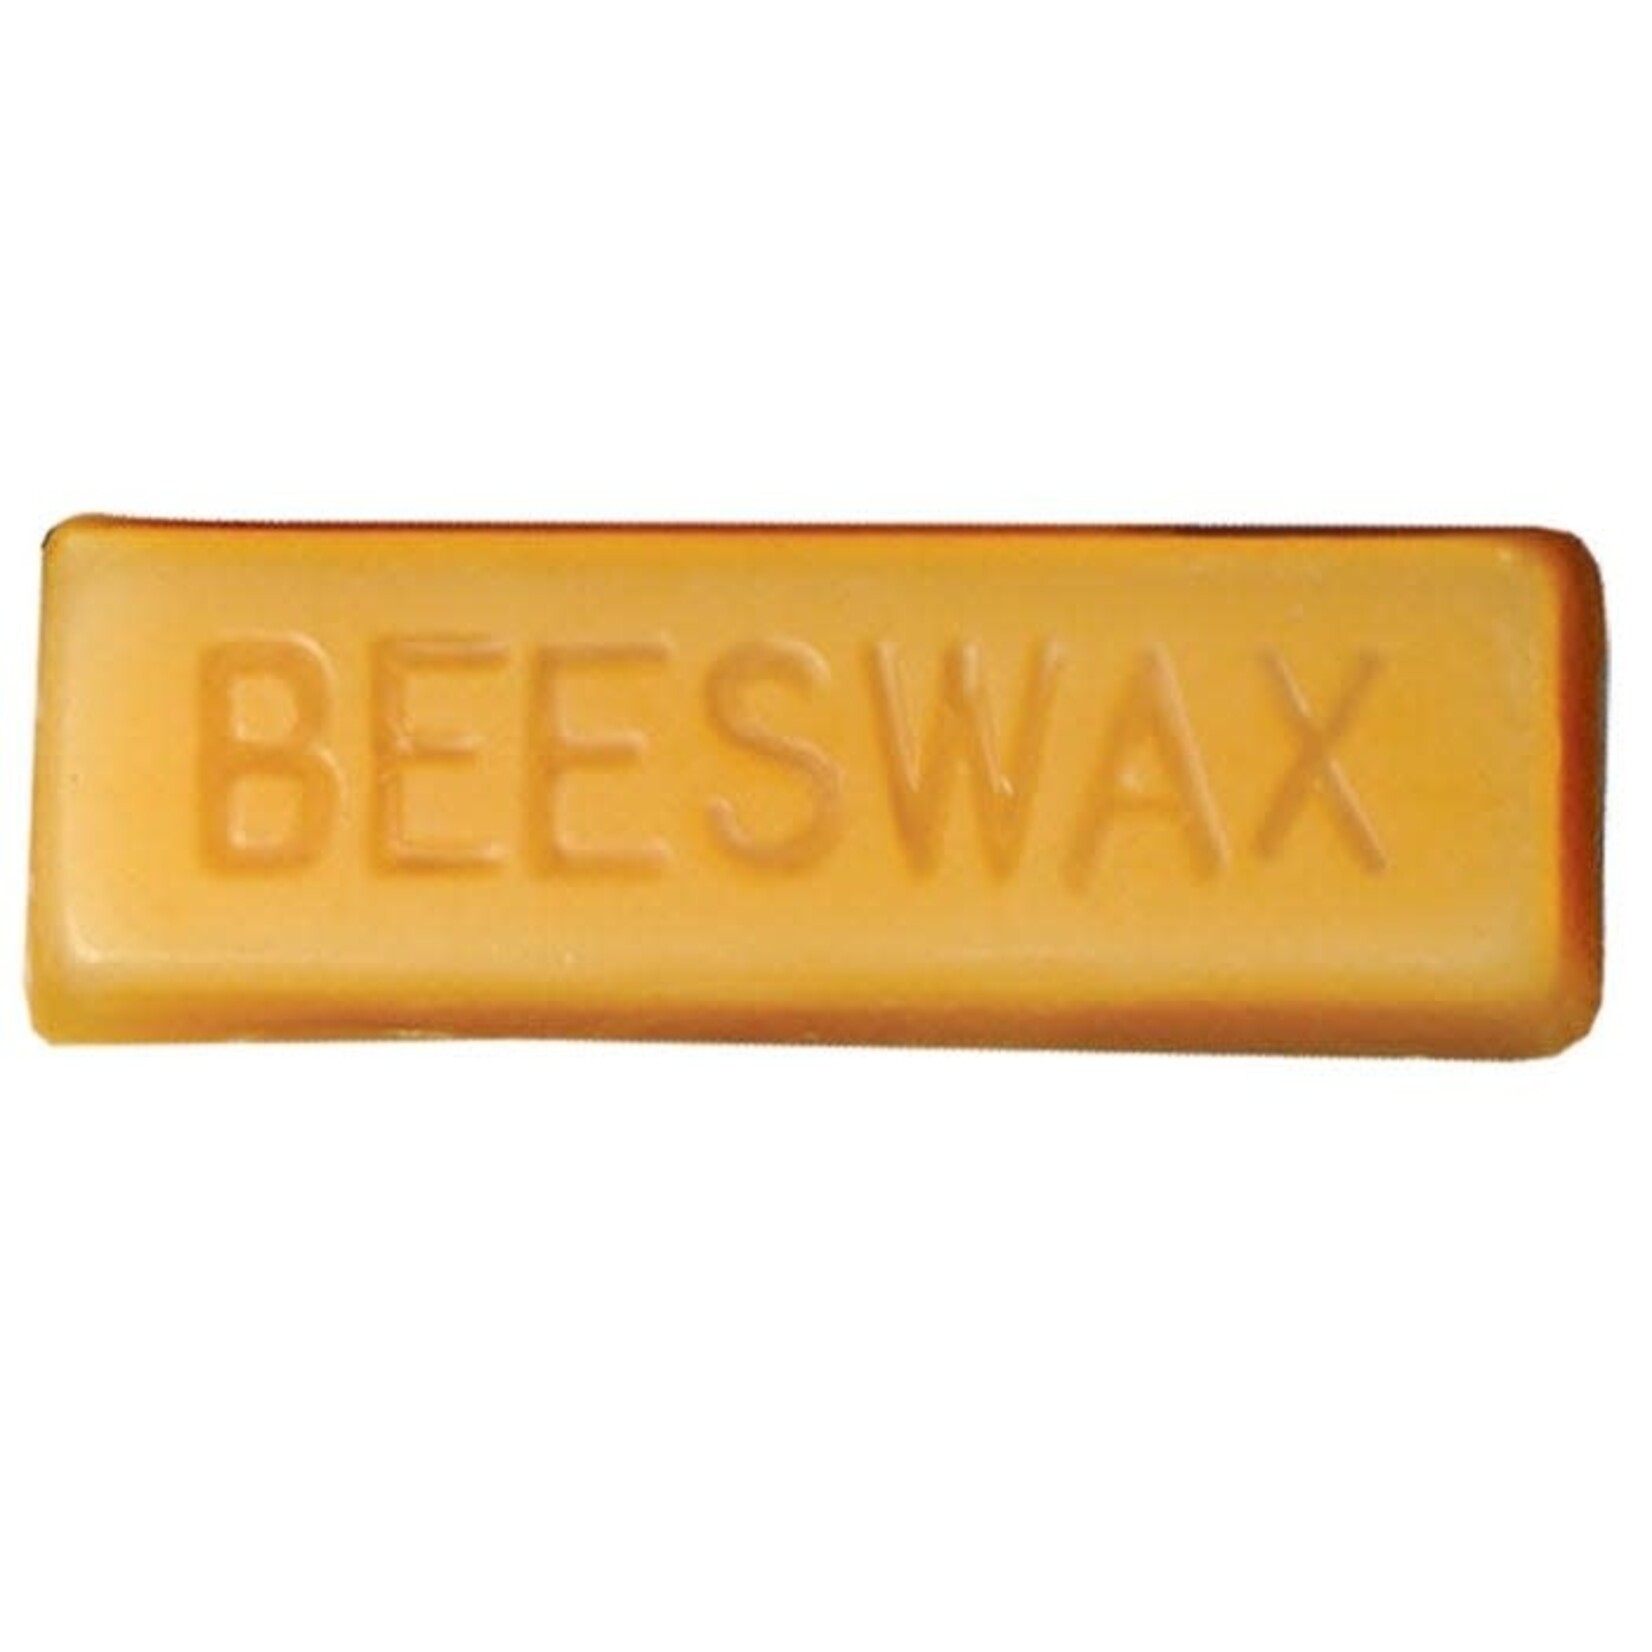 Lineco Beeswax For Thread